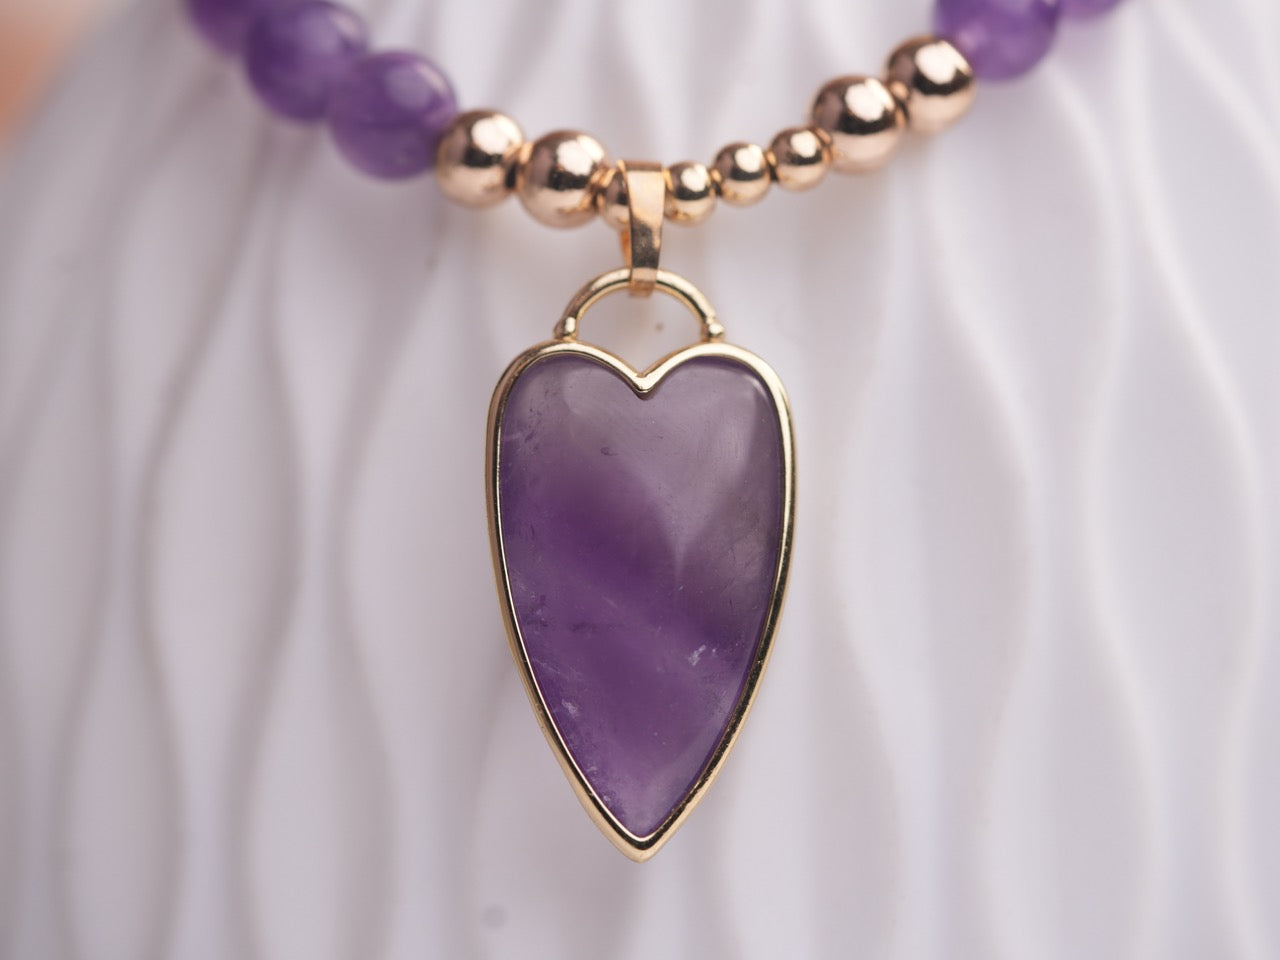 Amethyst Necklace with Love Shape Pendant: Embrace Divine Love and Harmony